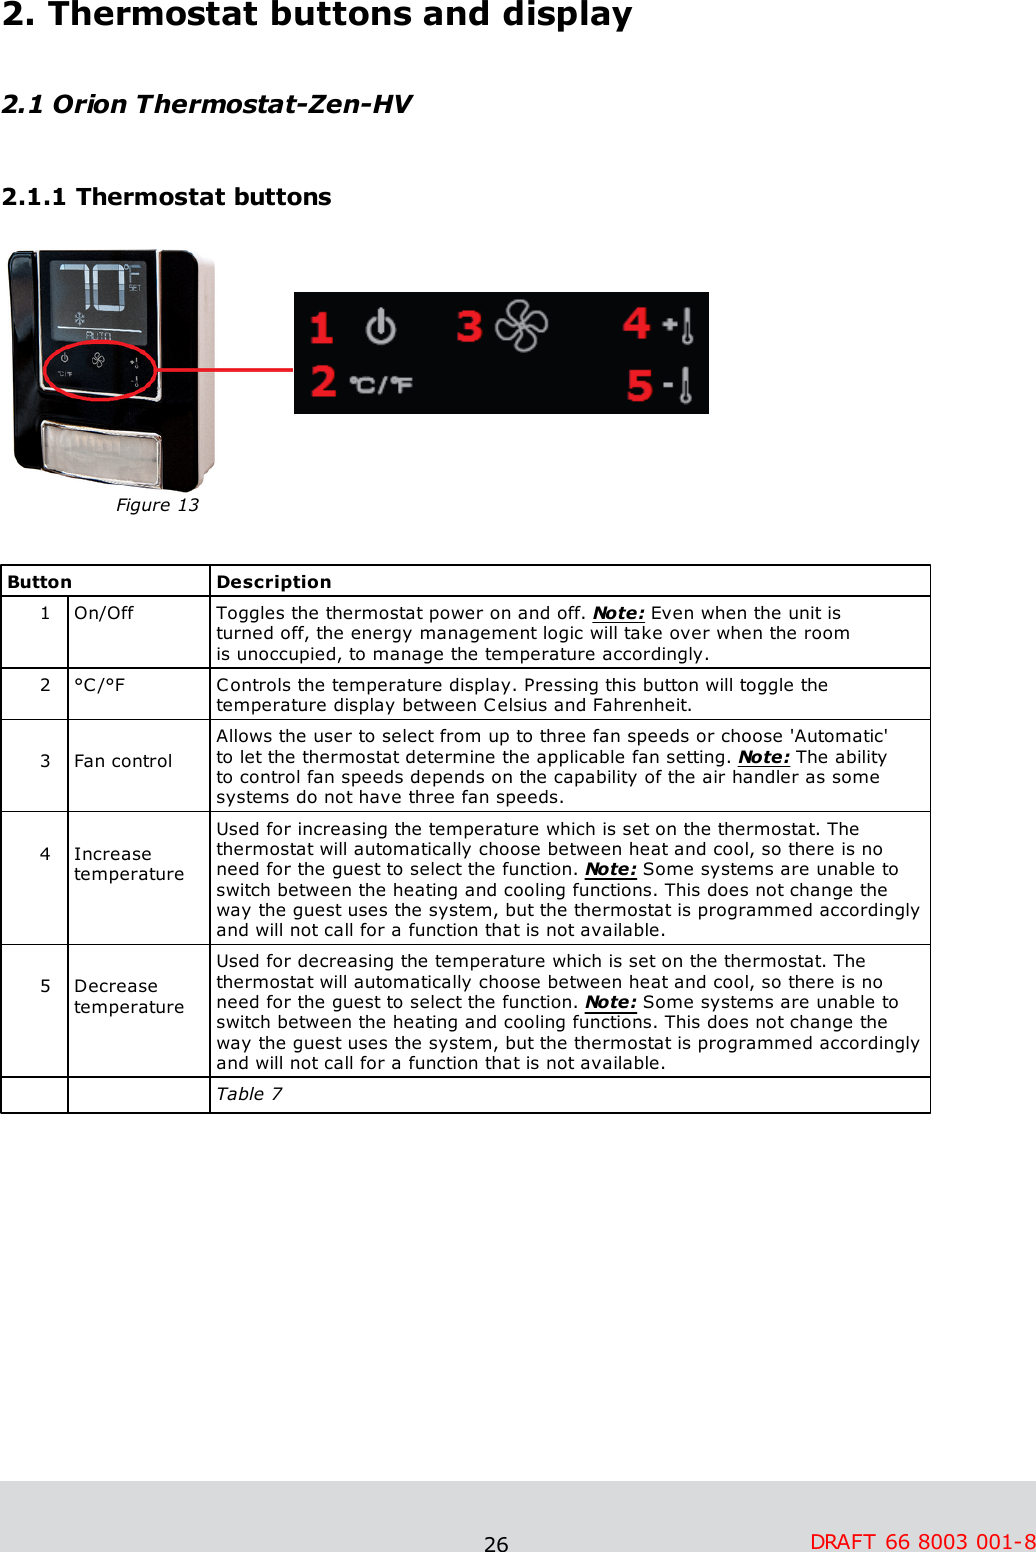 26 DRAFT 66 8003 001-82. Thermostat buttons and display2.1 Orion Thermostat-Zen-HV2.1.1 Thermostat buttonsFigure 13                                                 ButtonDescription1On/OffToggles the thermostat power on and off. Note: Even when the unit is turned off, the energy management logic will take over when the room is unoccupied, to manage the temperature accordingly. 2°C/°FControls the temperature display. Pressing this button will toggle the temperature display between Celsius and Fahrenheit. 3Fan controlAllows the user to select from up to three fan speeds or choose &apos;Automatic&apos; to let the thermostat determine the applicable fan setting. Note: The ability to control fan speeds depends on the capability of the air handler as somesystems do not have three fan speeds. 4IncreasetemperatureUsed for increasing the temperature which is set on the thermostat. Thethermostat will automatically choose between heat and cool, so there is no need for the guest to select the function. Note: Some systems are unable toswitch between the heating and cooling functions. This does not change the way the guest uses the system, but the thermostat is programmed accordingly and will not call for a function that is not available. 5DecreasetemperatureUsed for decreasing the temperature which is set on the thermostat. Thethermostat will automatically choose between heat and cool, so there is no need for the guest to select the function. Note: Some systems are unable toswitch between the heating and cooling functions. This does not change the way the guest uses the system, but the thermostat is programmed accordinglyand will not call for a function that is not available. Table 7                                                                                                                                                                                                                    